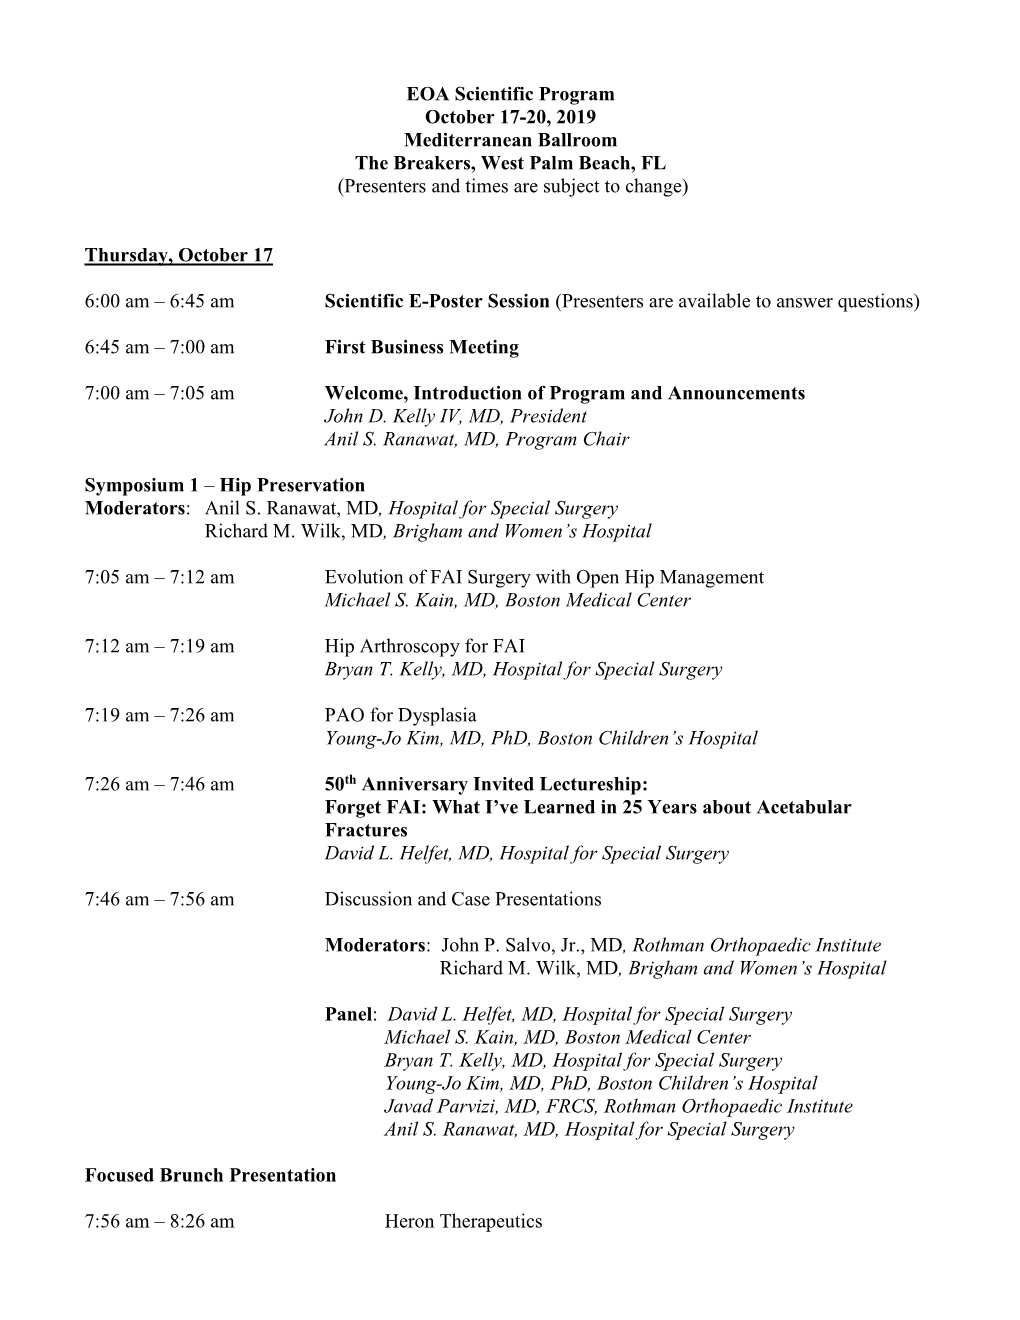 EOA Scientific Program October 17-20, 2019 Mediterranean Ballroom the Breakers, West Palm Beach, FL (Presenters and Times Are Subject to Change)